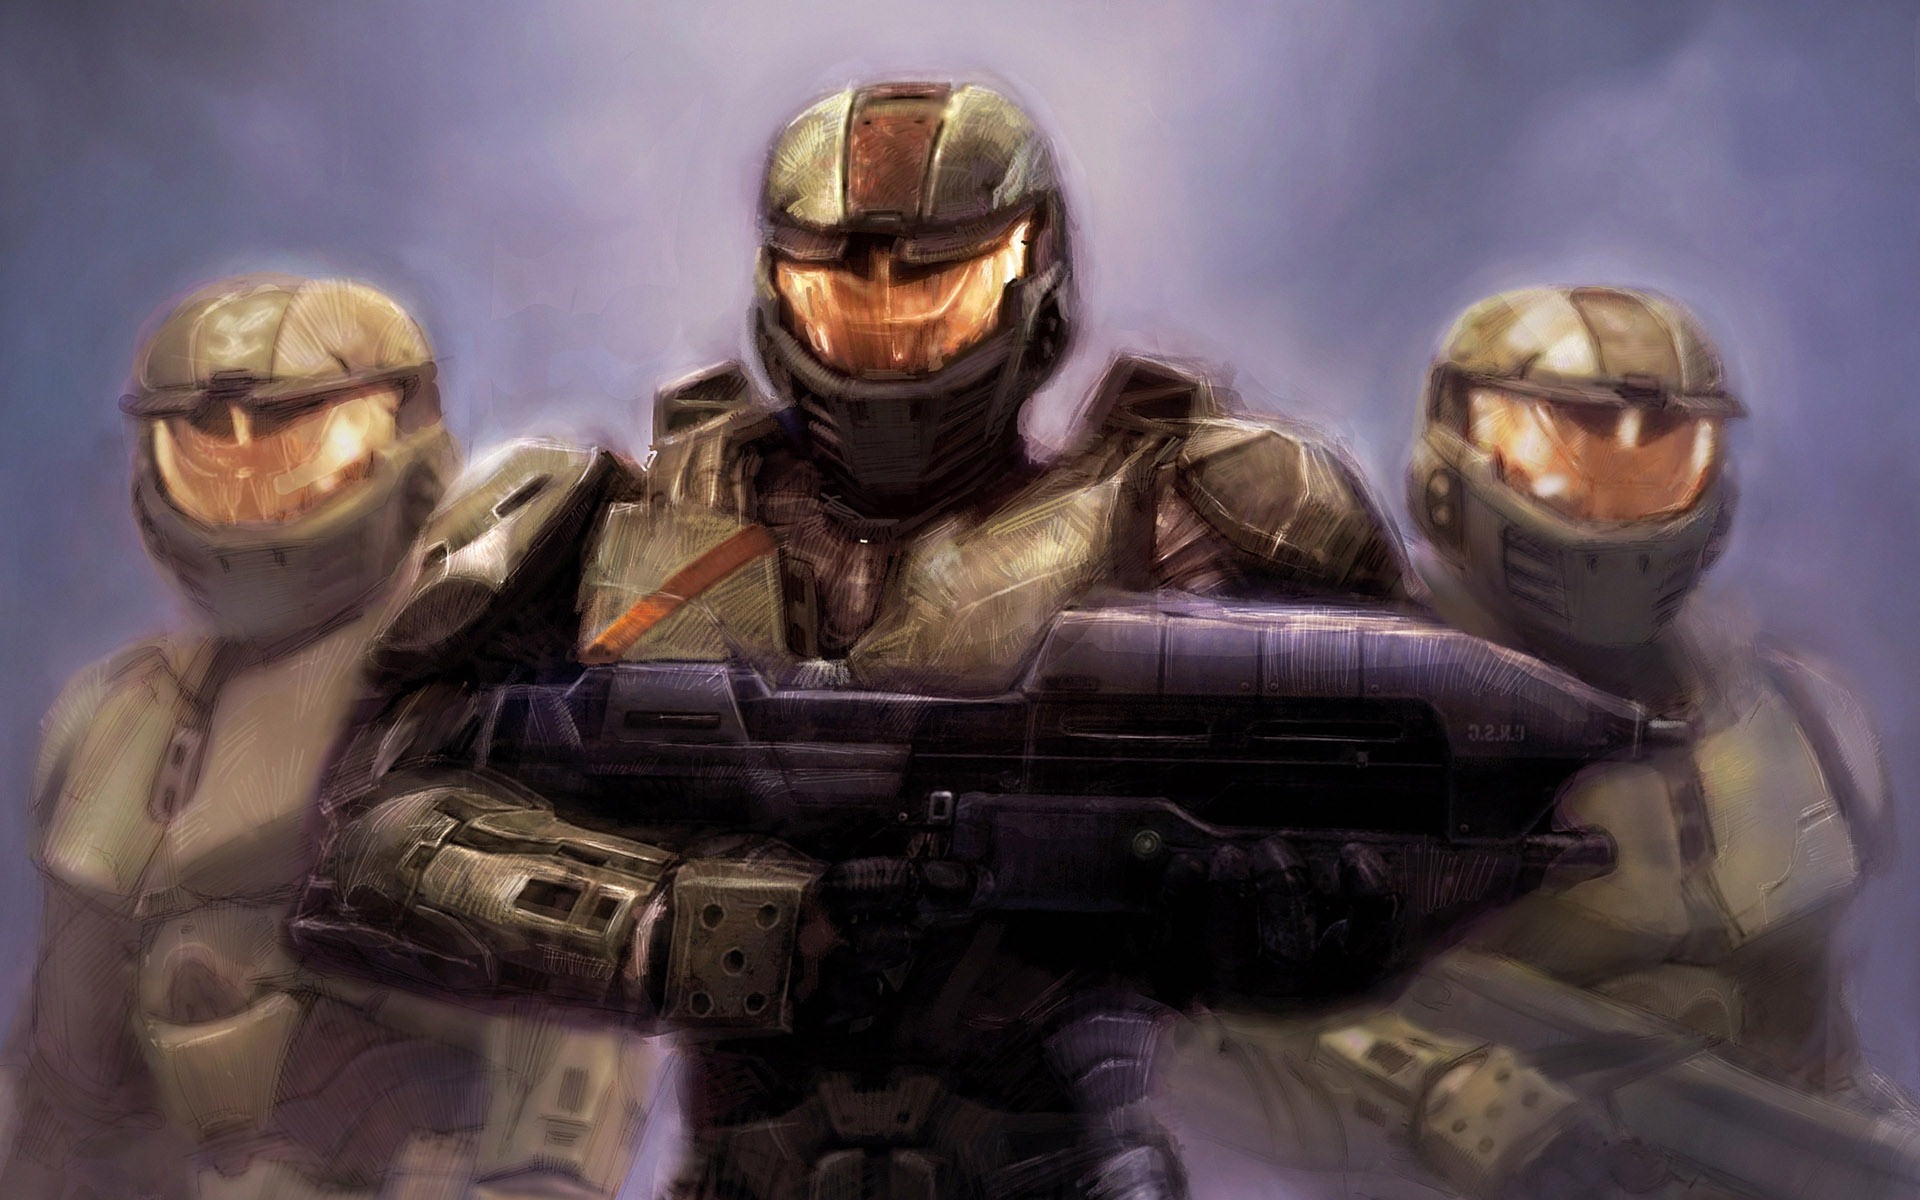 Halo game HD wallpapers #16 - 1920x1200